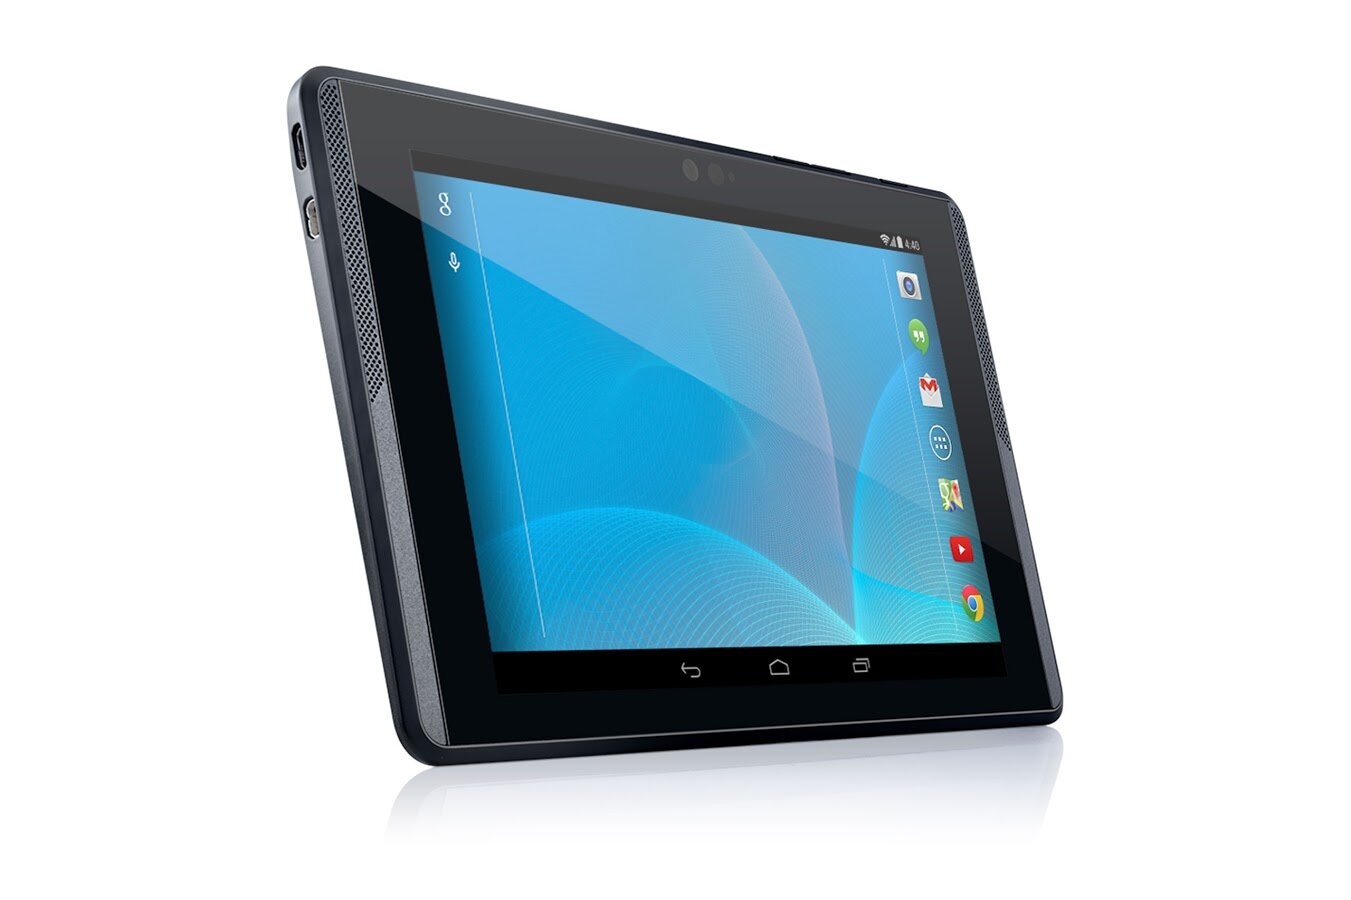 Tablet Project Tango